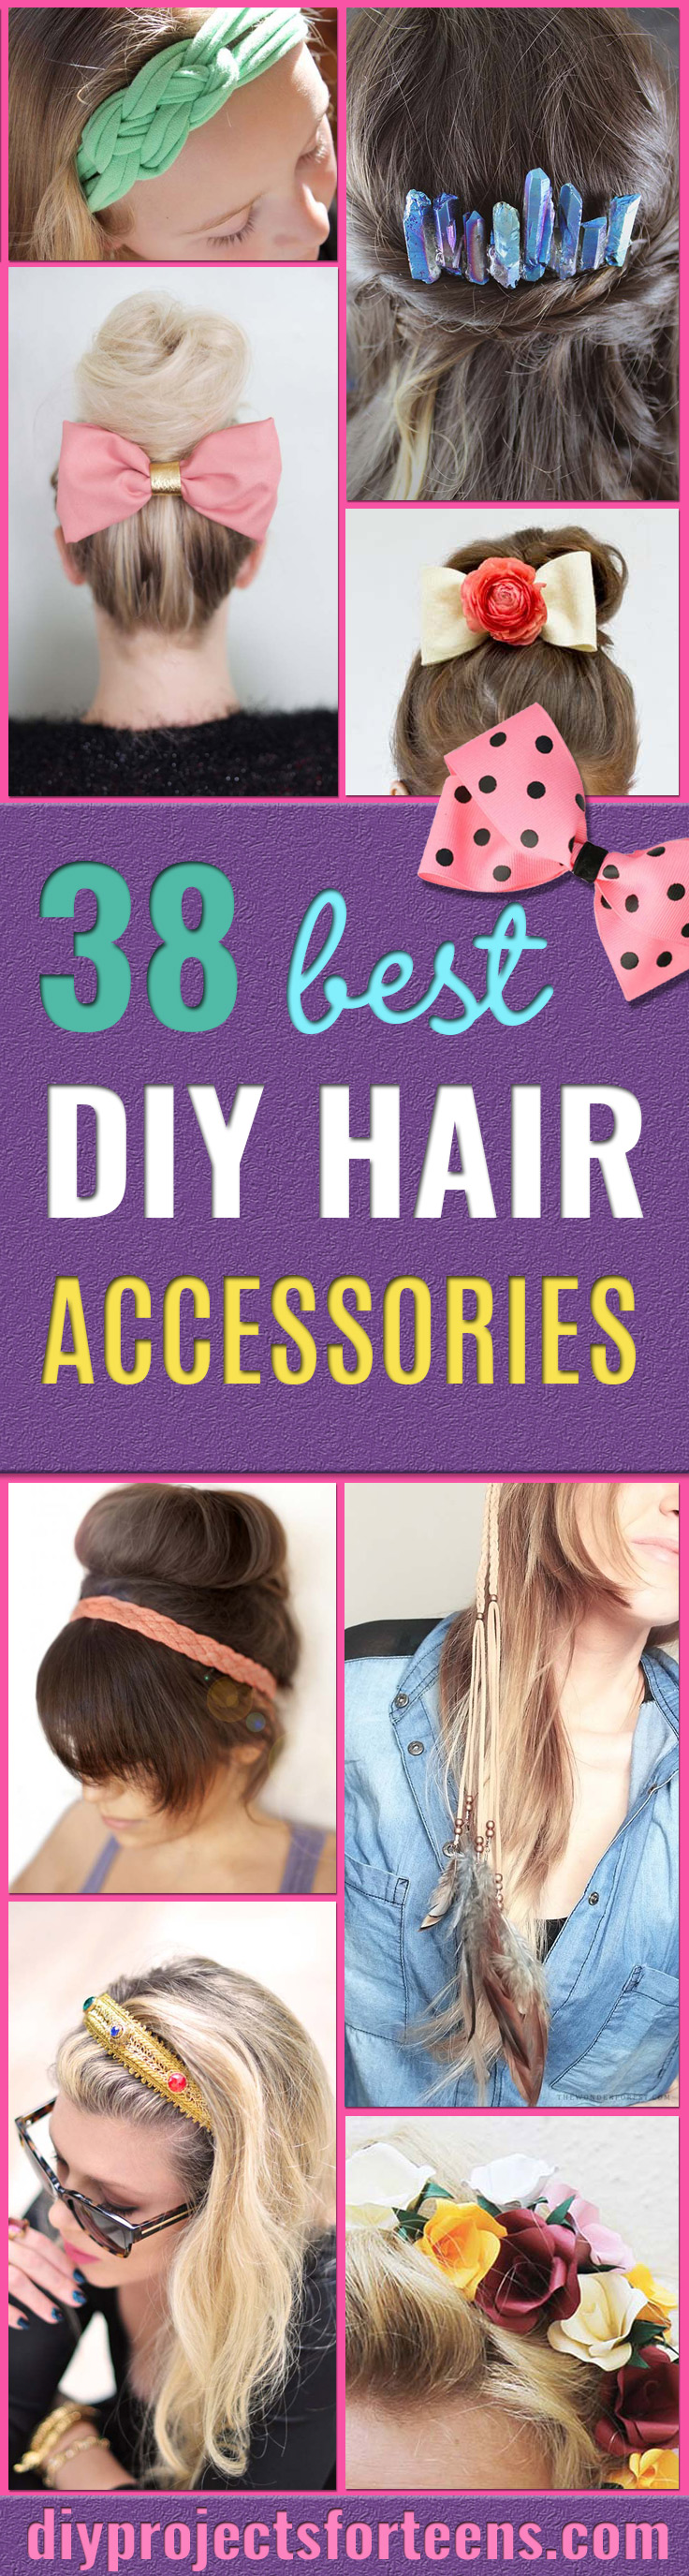 38 Creative DIY Hair Accessories - Create Pretty Hairstyles for Women, Teens and Girls with These Easy Tutorials - Vintage and Boho Looks for Prom and Wedding - Step by Step Instructions for Cool Headbands, Barettes, Pony Tail Holders, Hair Clips, Bobby Pins and Bows 